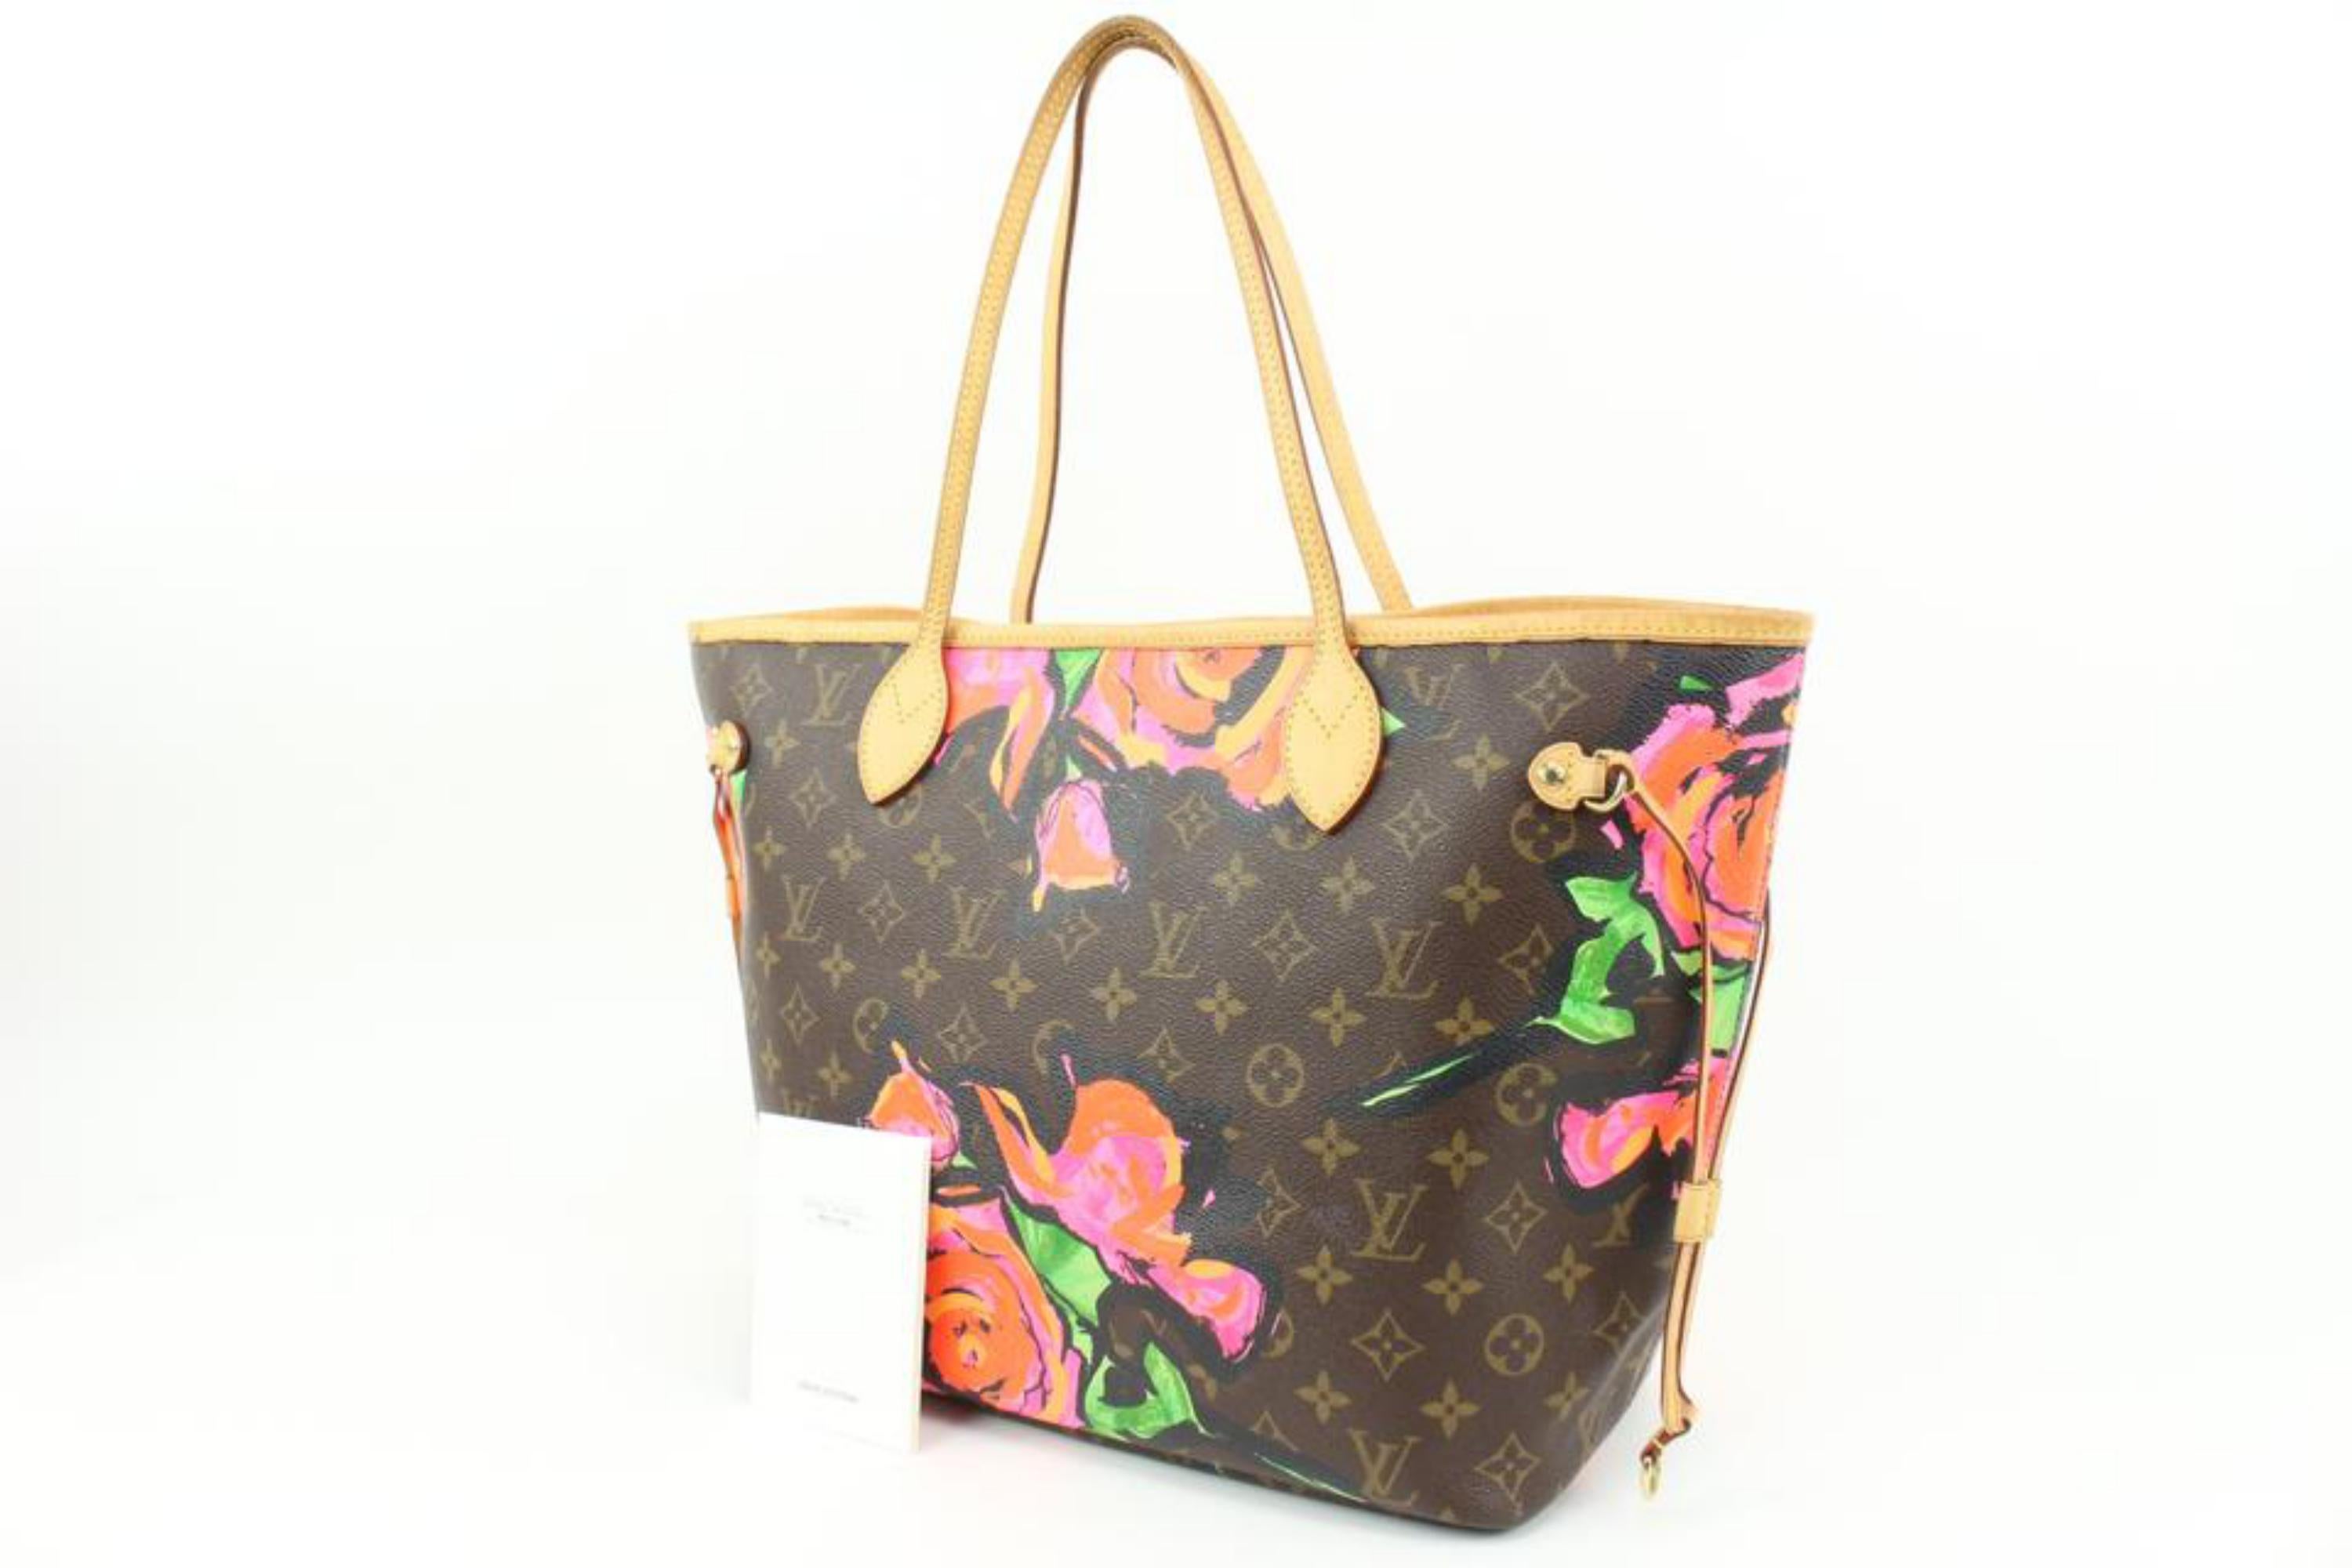 Louis Vuitton Stephen Sprouse Graffiti Monogram Roses Neverfull MM Tote 9lk310s
Date Code/Serial Number: VI0089
Made In: France
Measurements: Length:  18